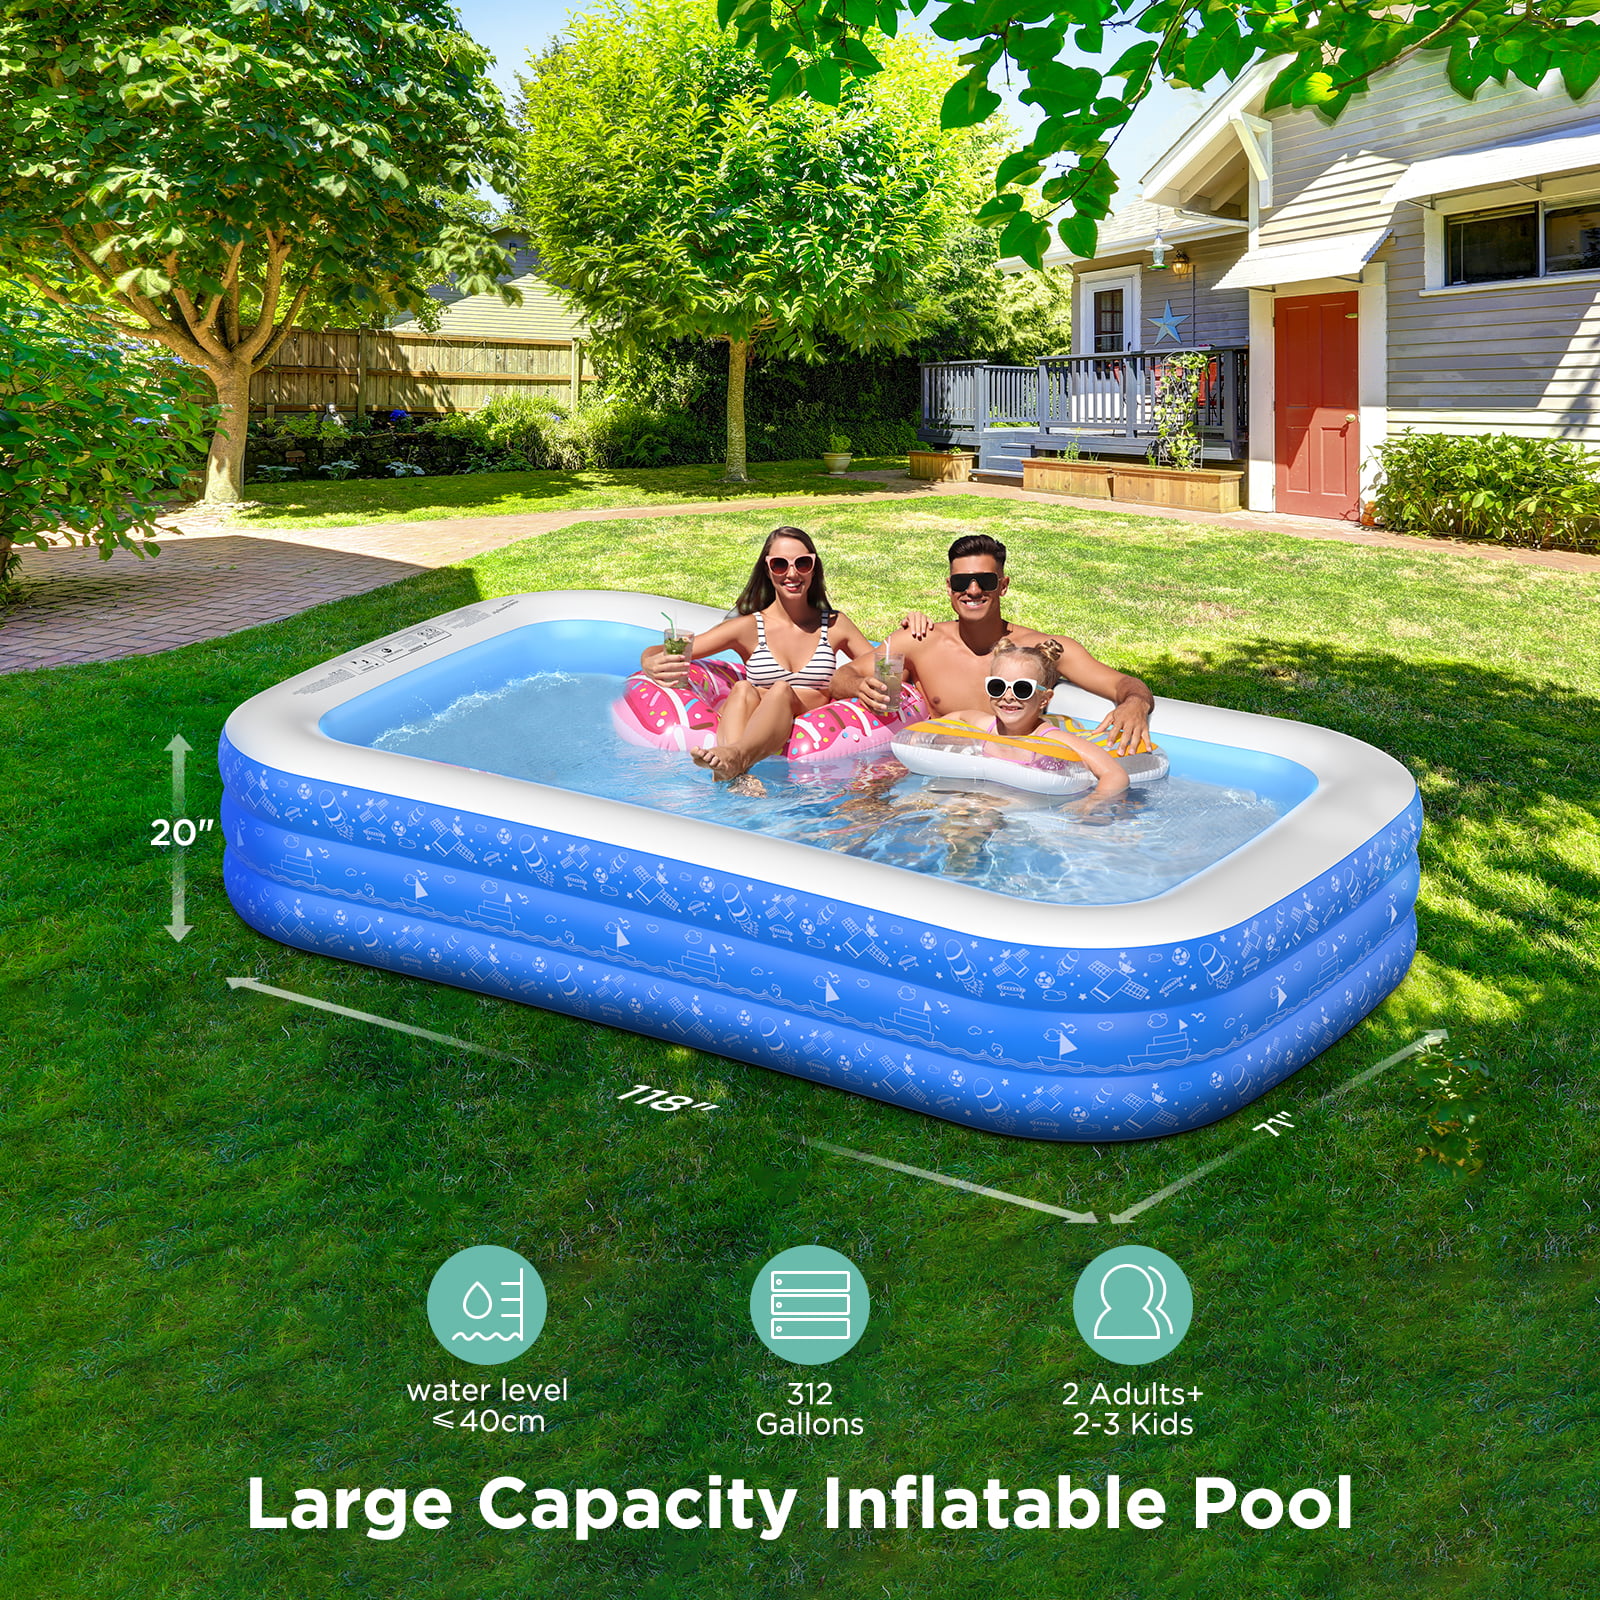 Family Full-Sized Pool ， Family Inflatable Swimming Pool Thick Lounge Pool Summer Water Party Supply for Baby Kids Adult for Outdoor Garden Backyard 